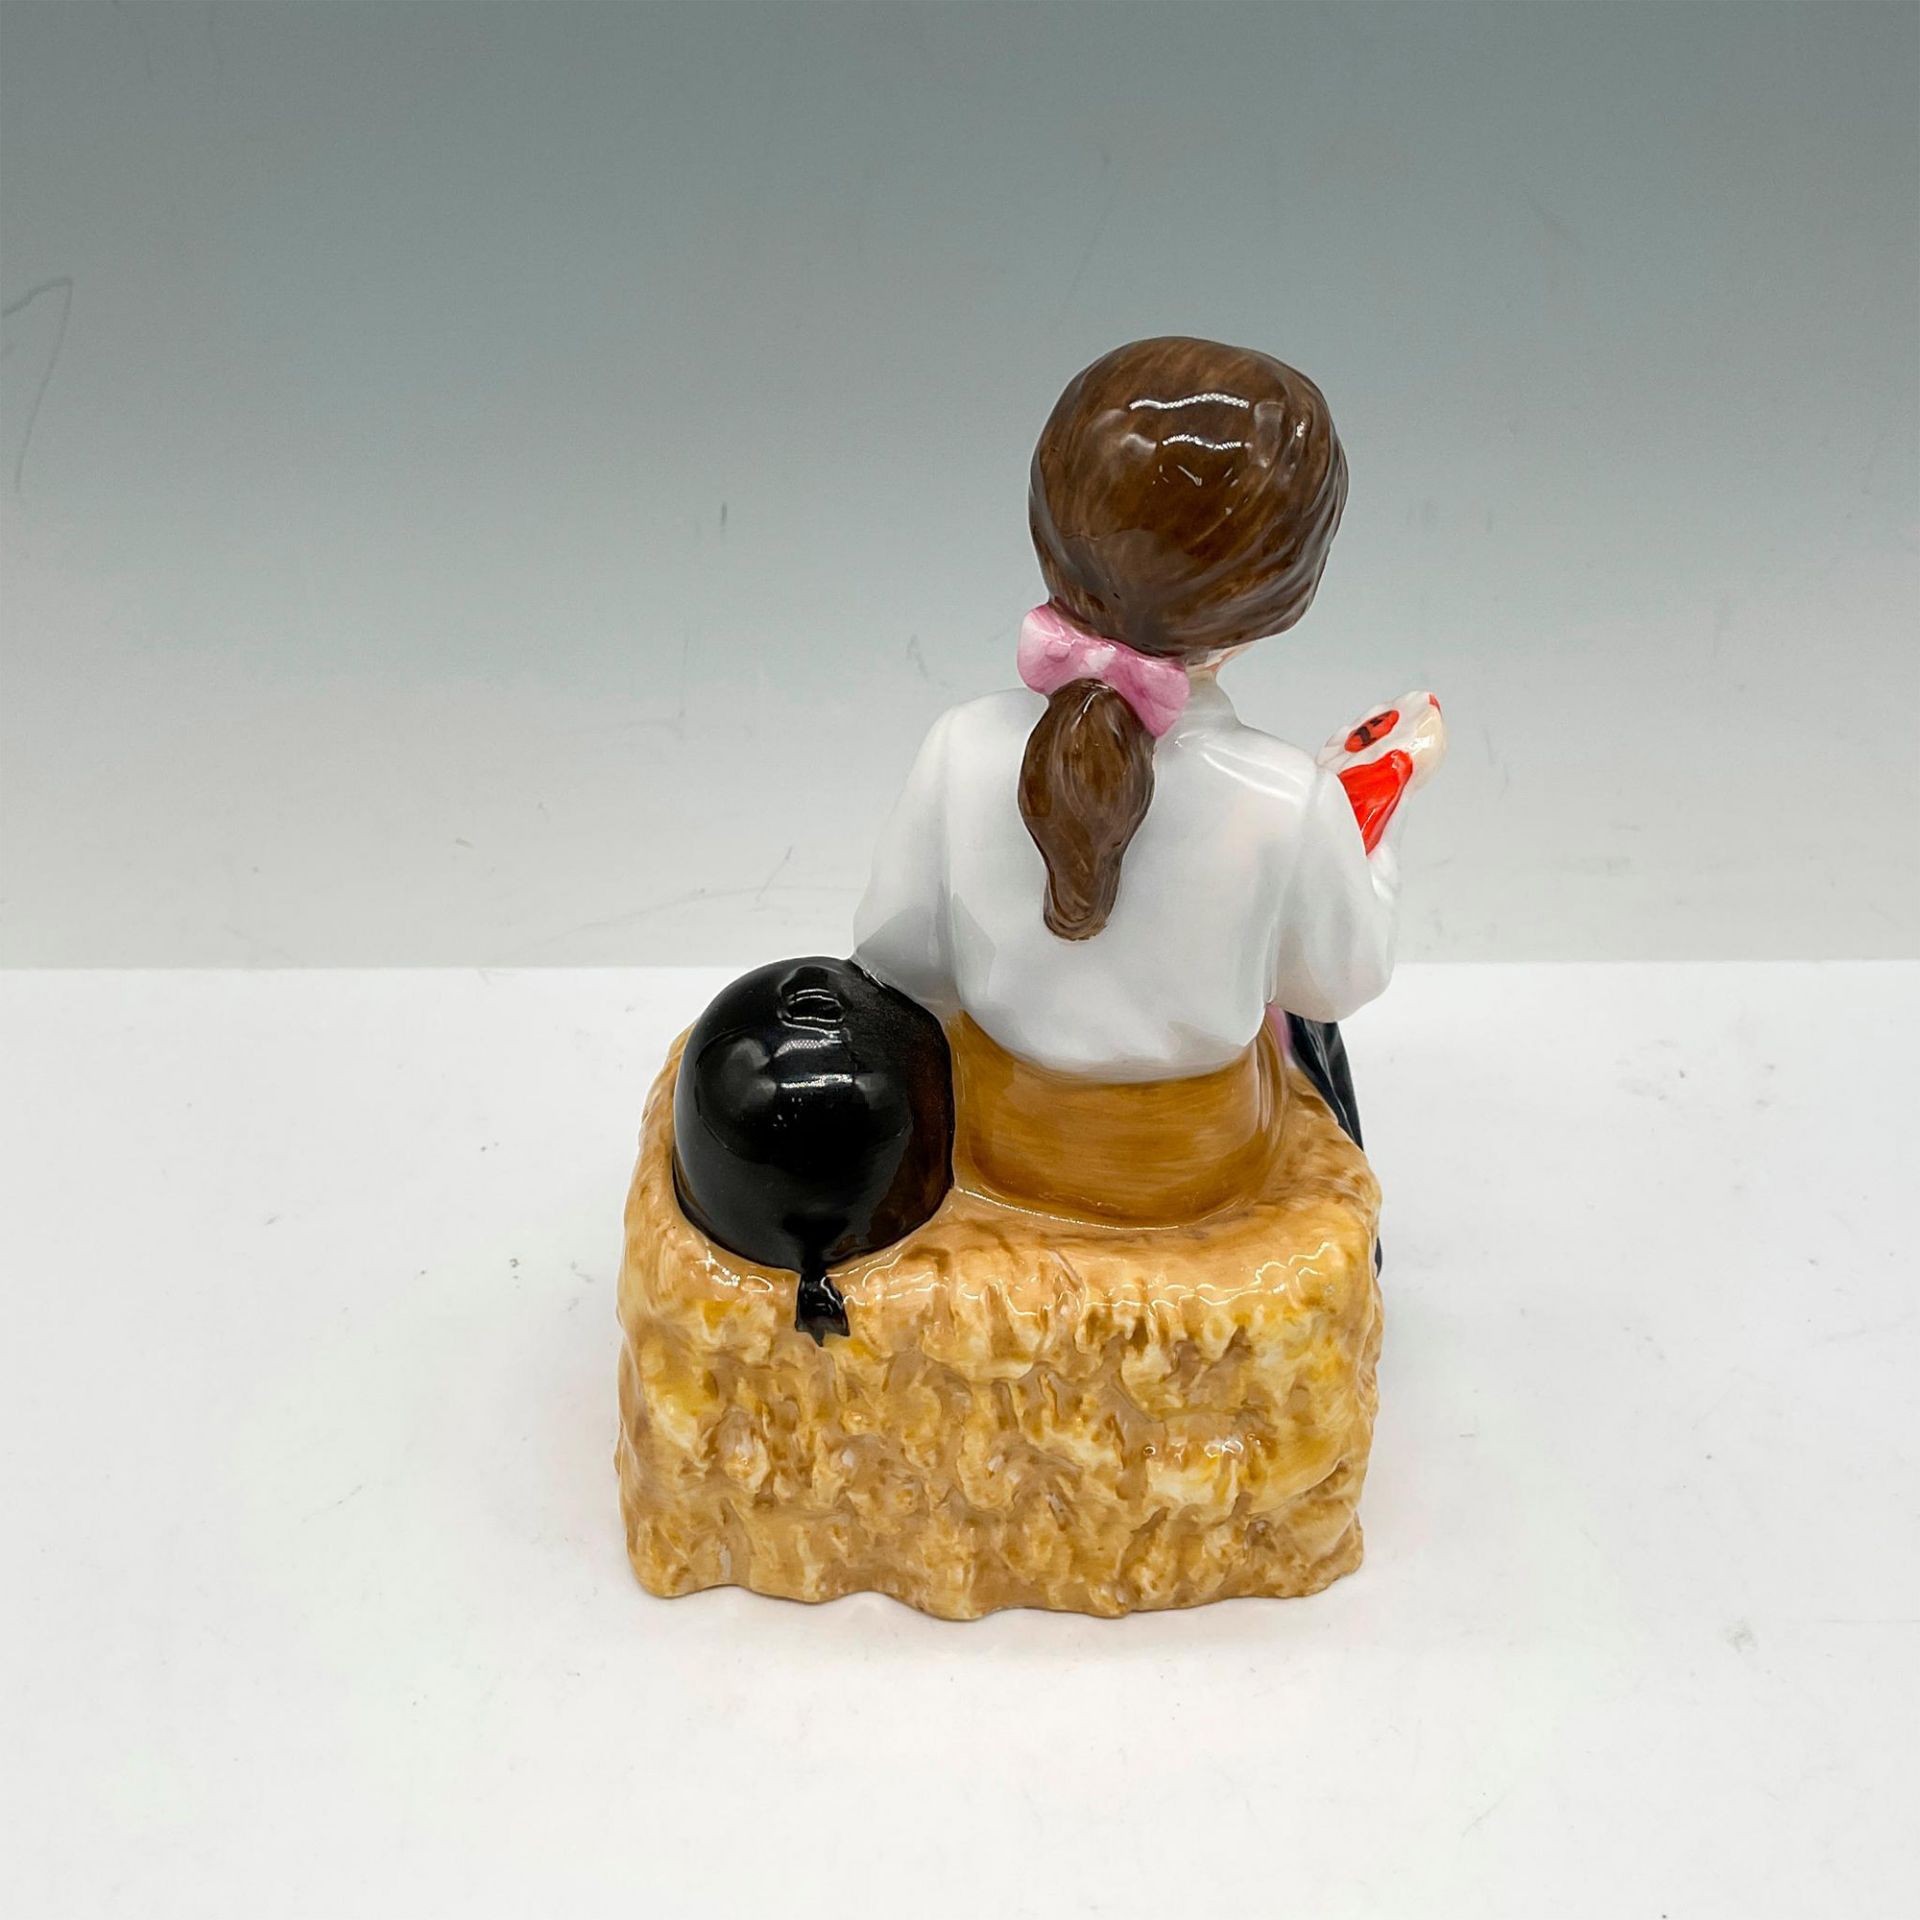 First Prize - HN3911 - Royal Doulton Figurine - Image 2 of 3